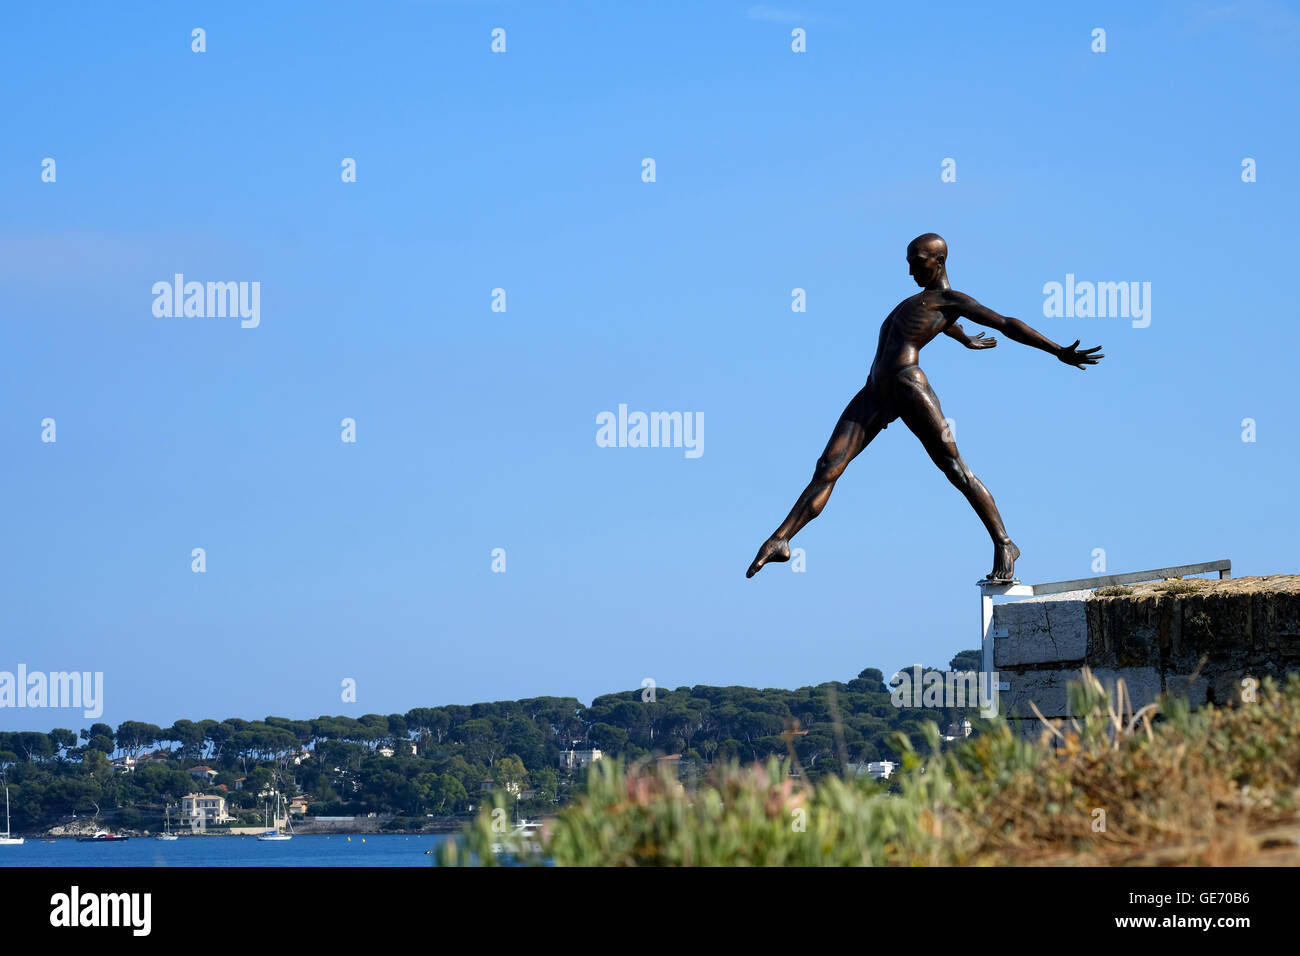 A Nicolas Laverenne sculpture positioned overlooking the bay in antibes, France Stock Photo